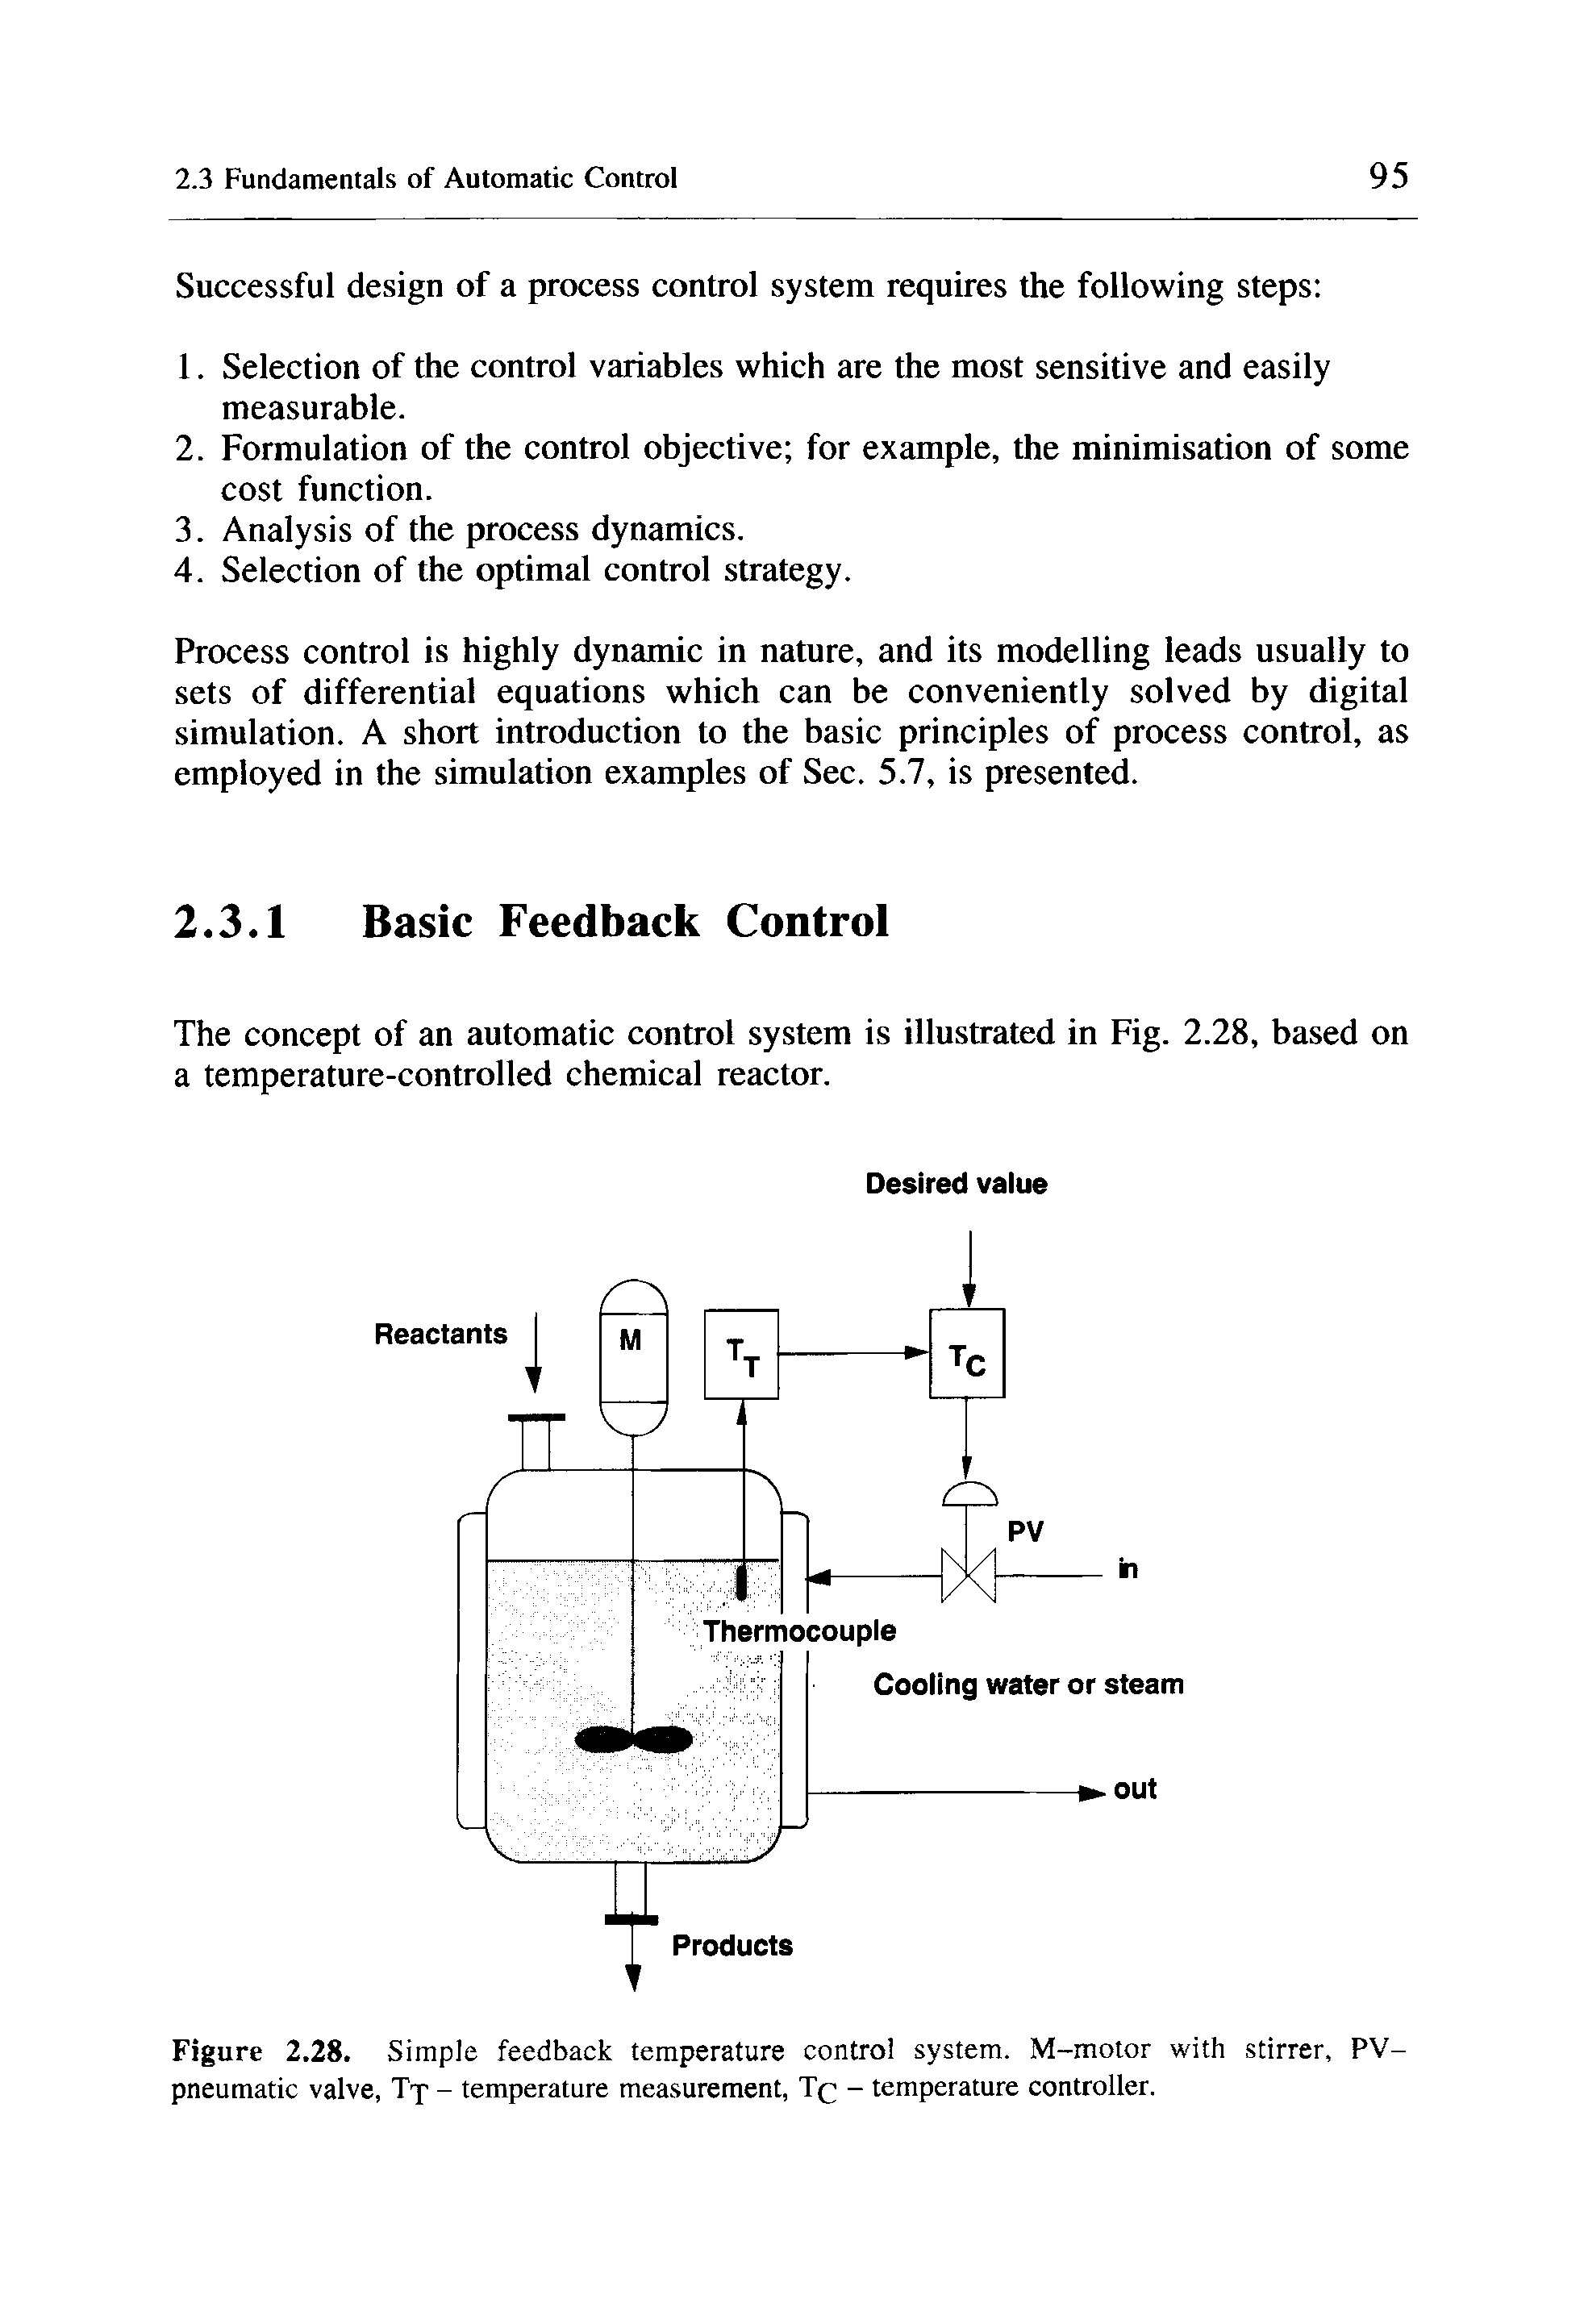 Figure 2.28. Simple feedback temperature control system. M-motor with stirrer, PV-pneumatic valve, Tx - temperature measurement, - temperature controller.